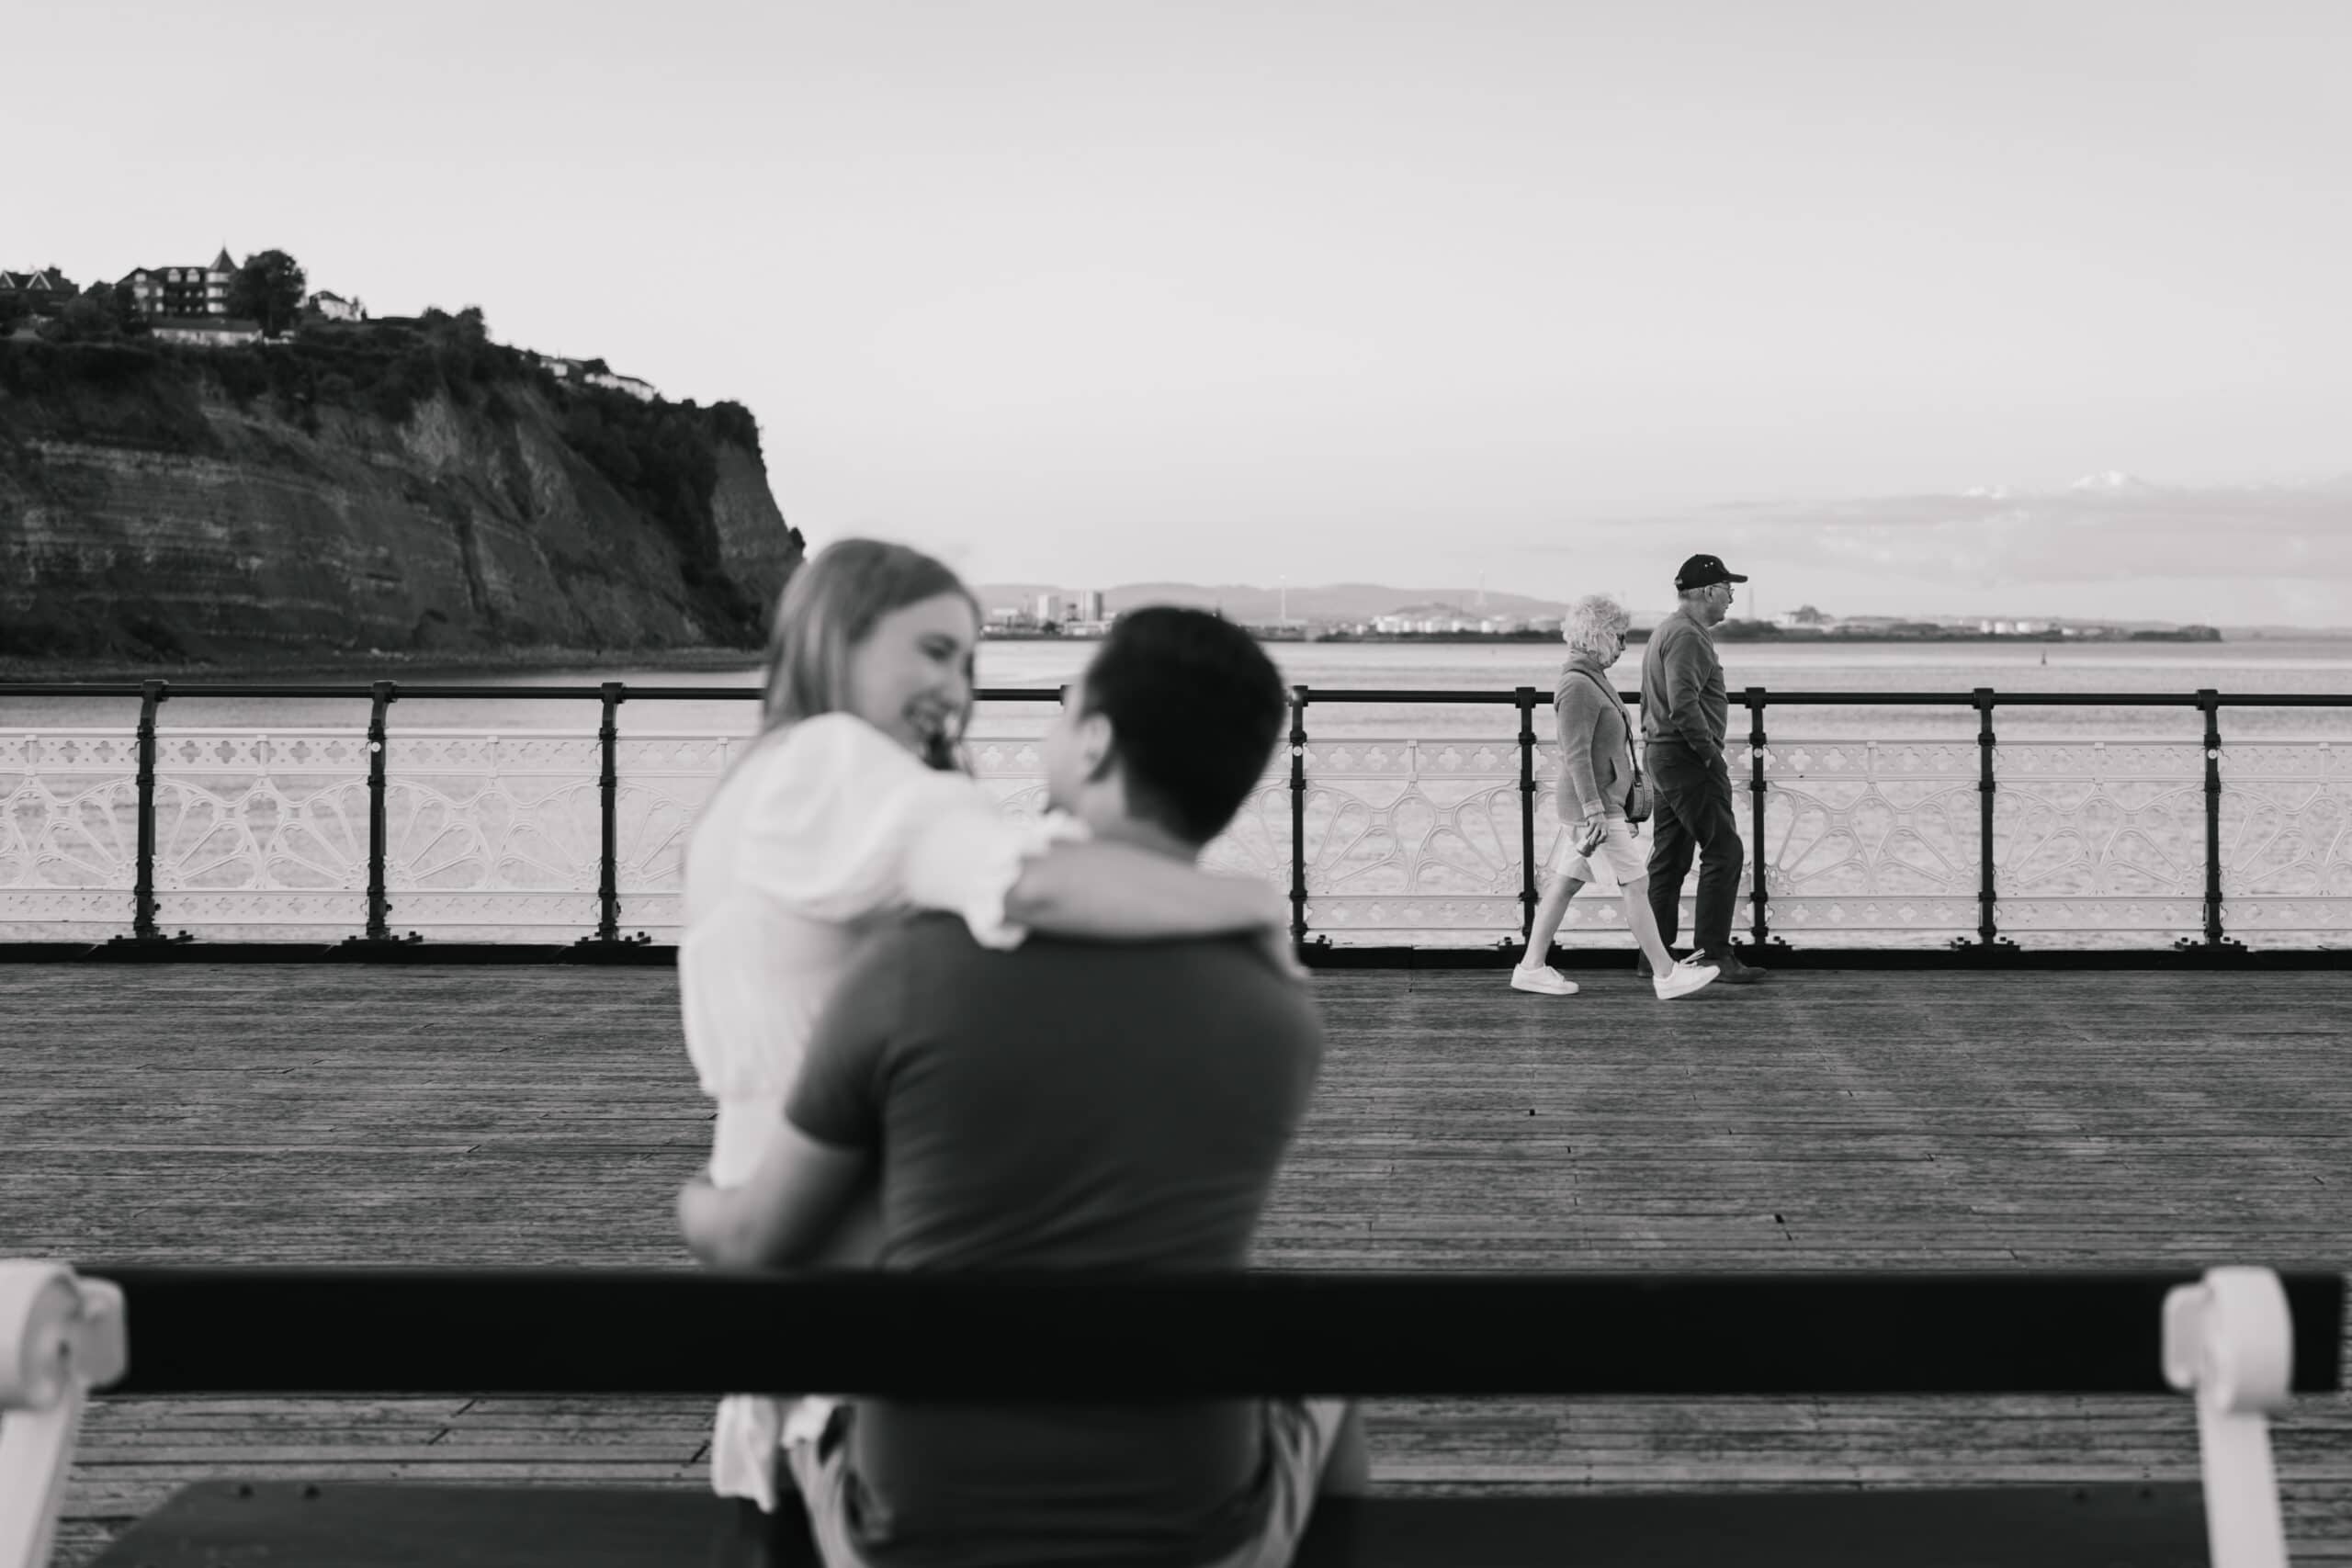 A black and white photo showing a couple embracing and smiling at each other on a pier, with an elderly couple walking in the background and a seascape with cliffs visible under a clear sky.